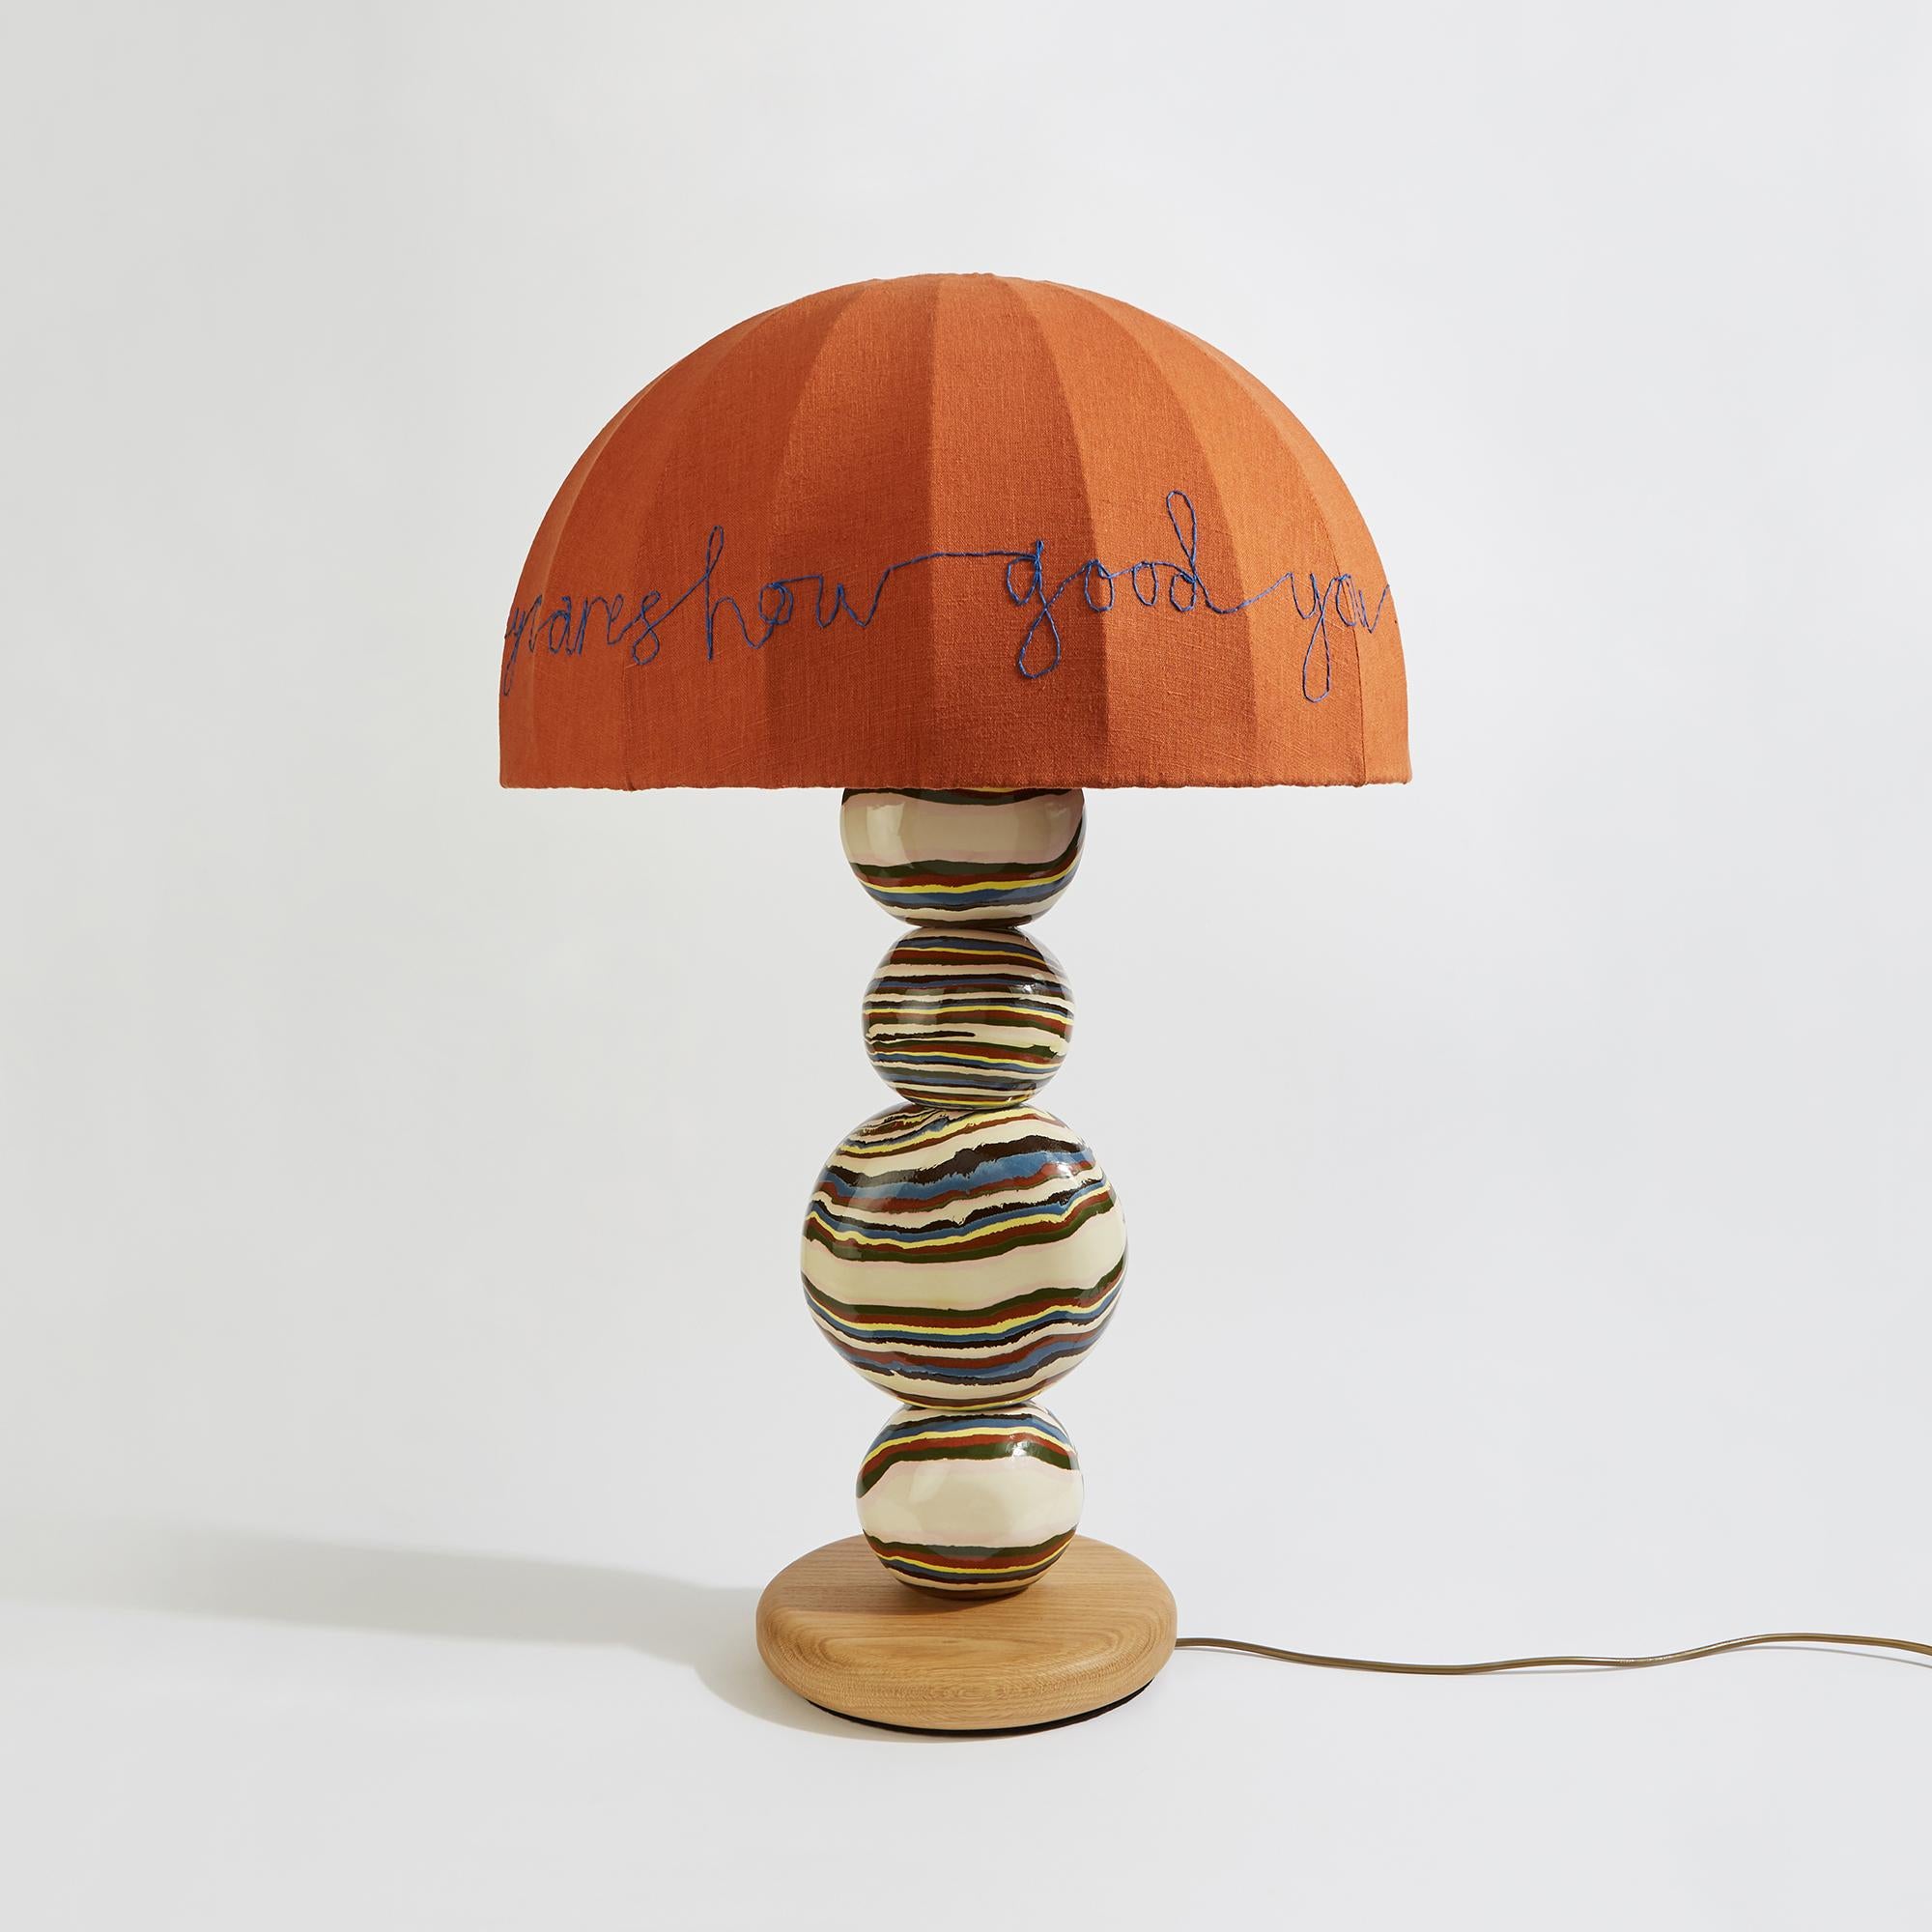  'Nobody Cares How Good You Used To Be',  the name given to the collaboration between Henry Holland and Paul Smith. This lamp as well as special one-off creations came about through Henry’s experimentation with form shape and colours inspired by